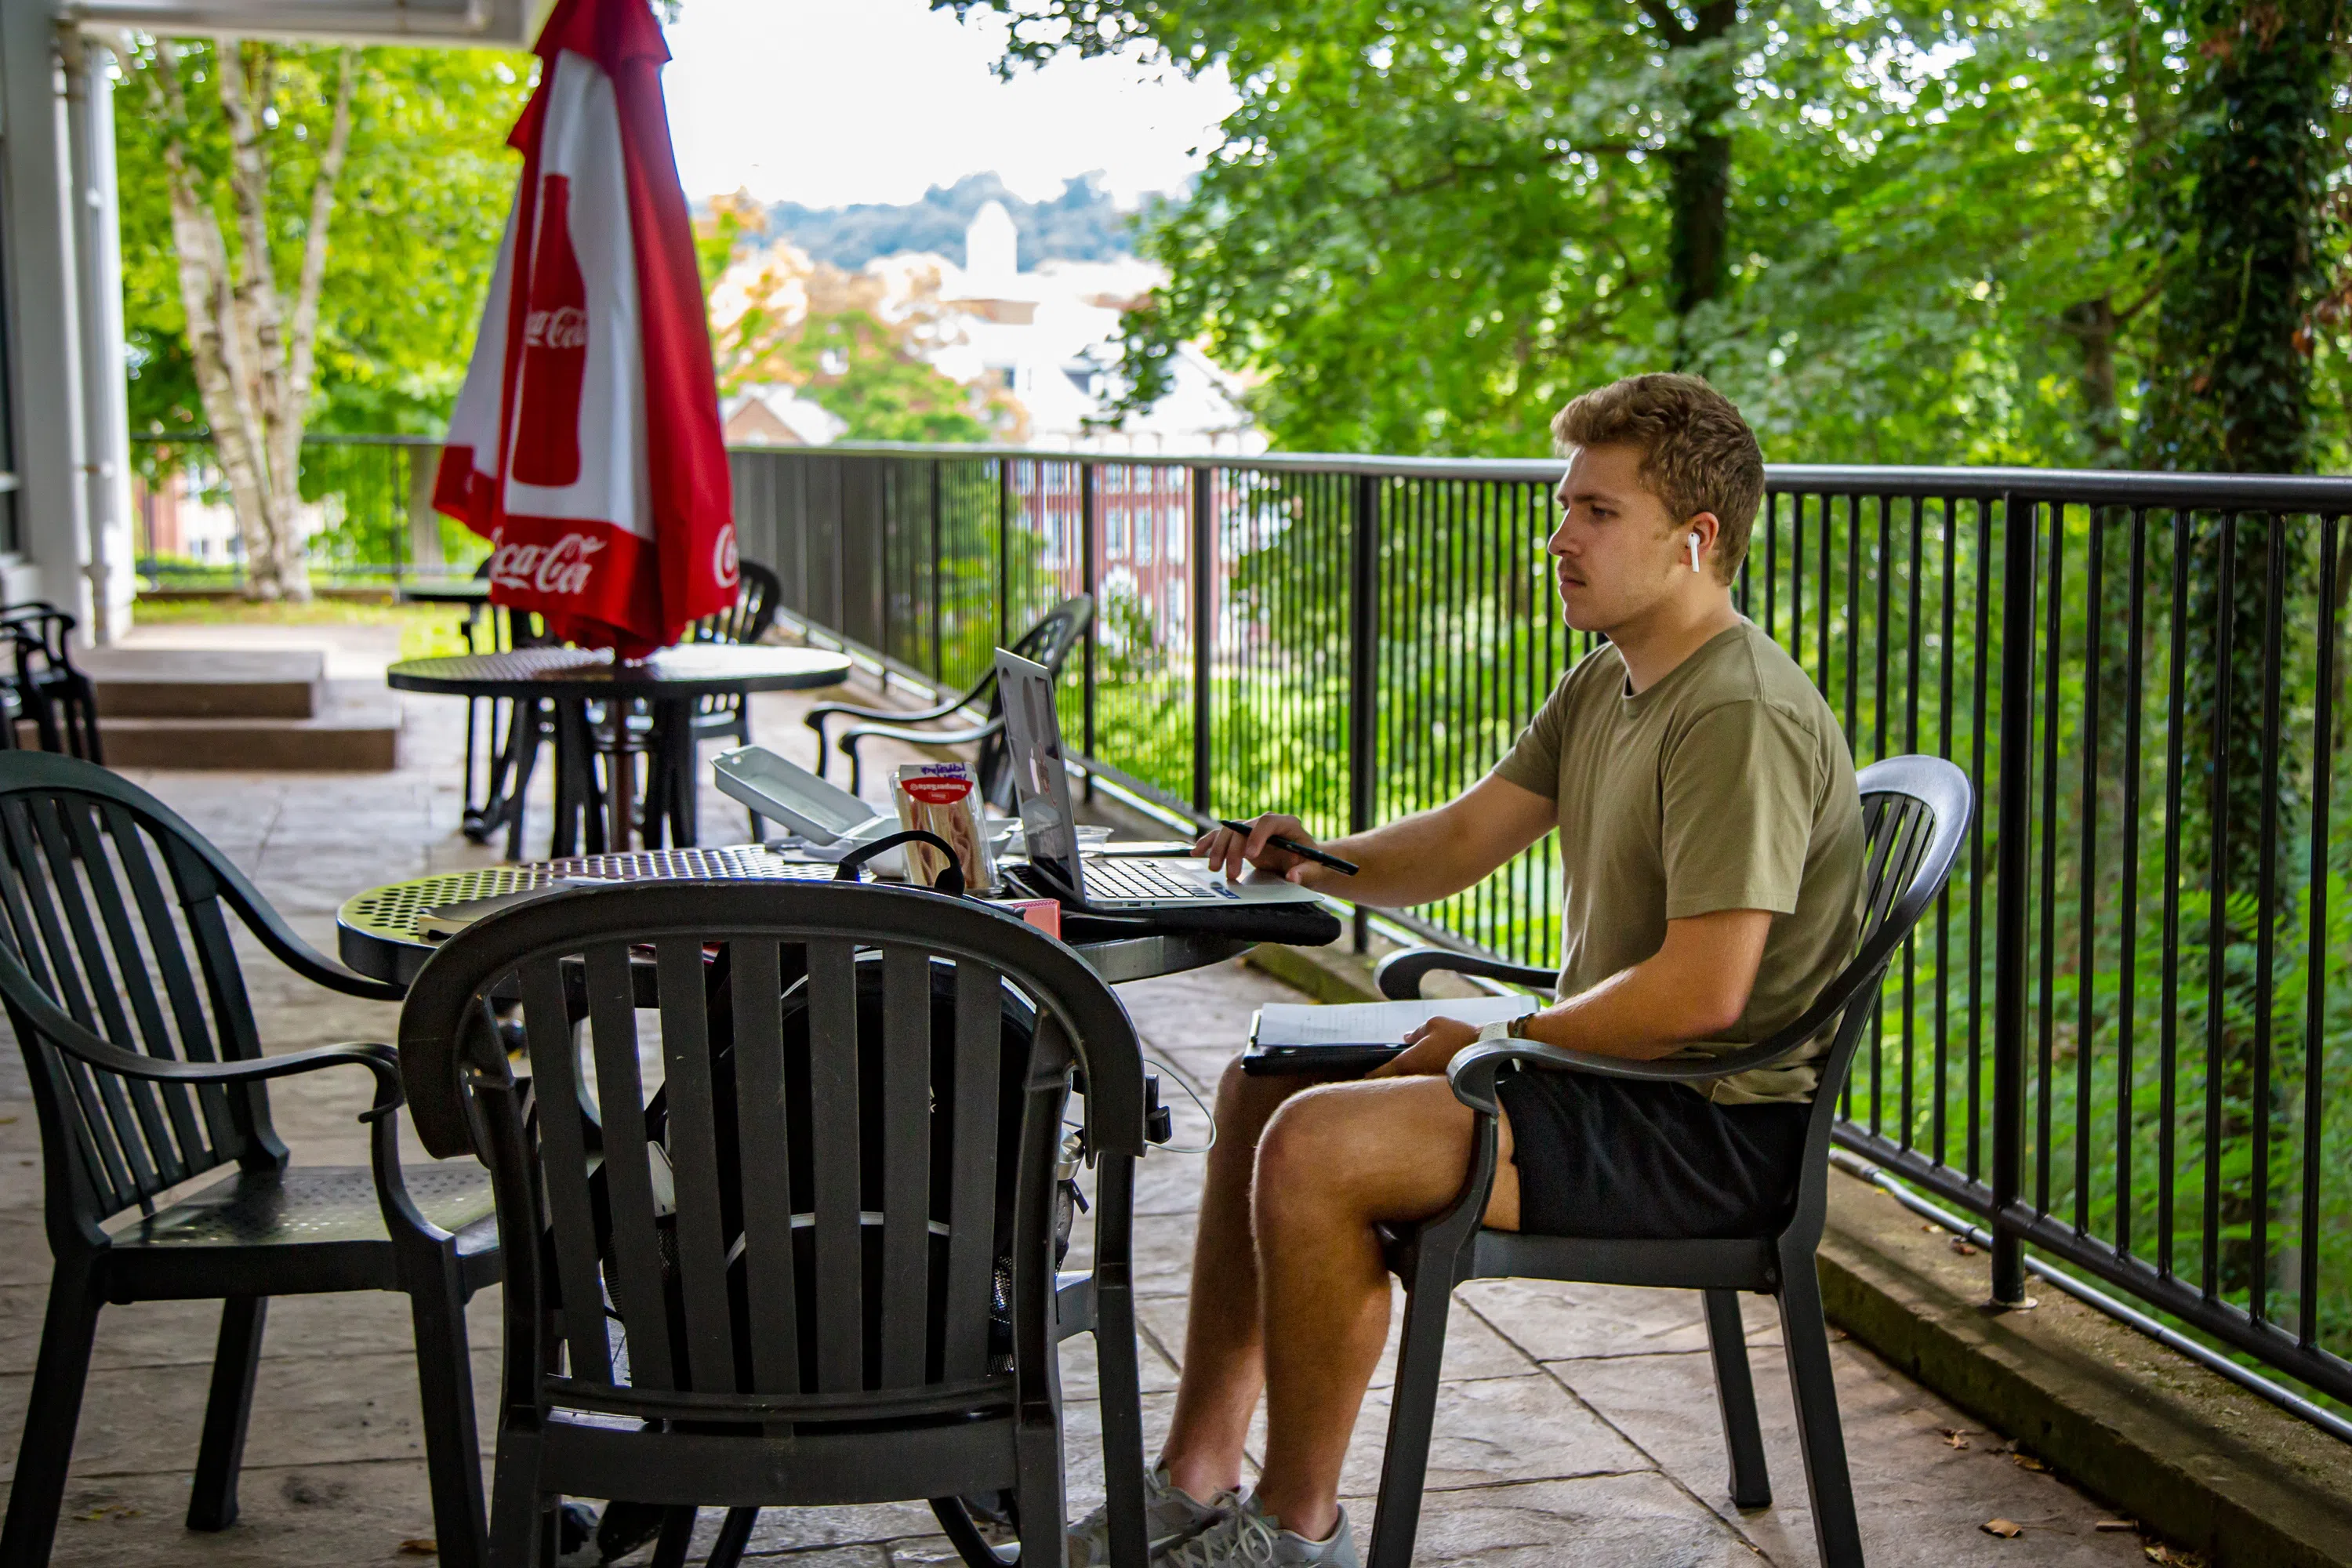 Student studying and enjoying the patio at Madden Student Center